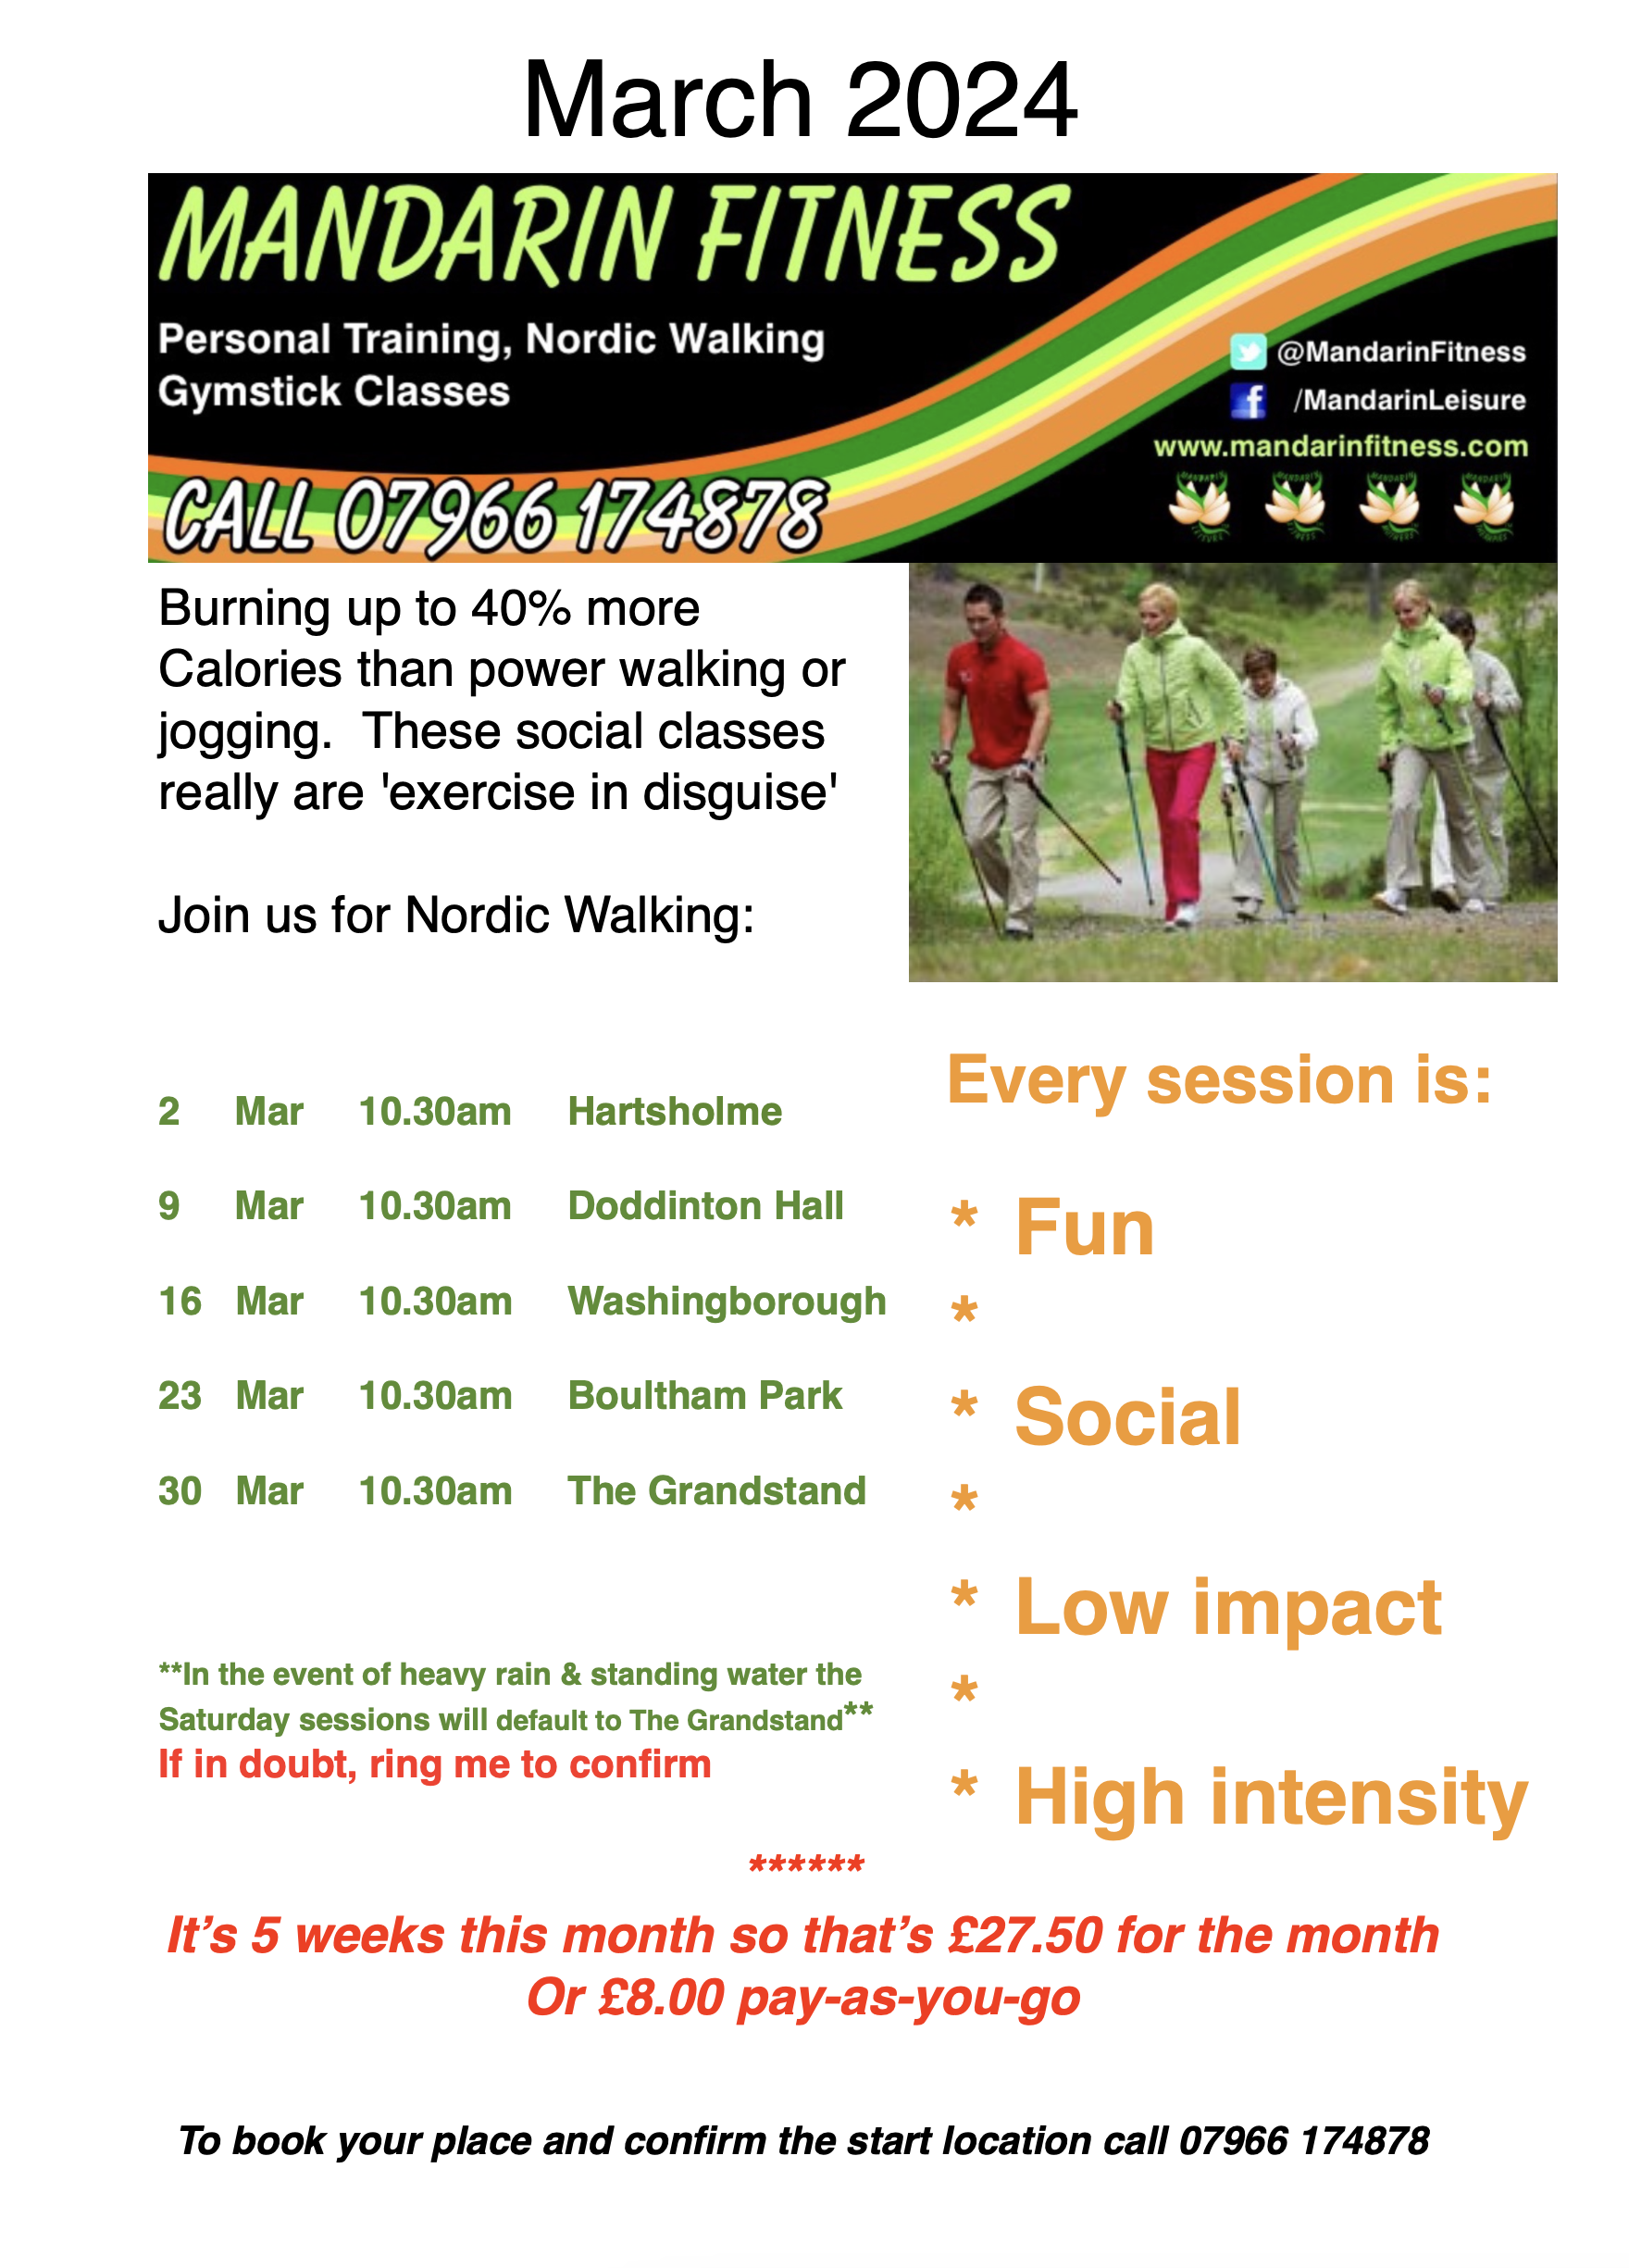 Mandarin Fitness Nordic Walking in Lincoln, Lincolnshire on WhatsOnLincs, what's on in Lincolnshire by LincsConnect the Lincolnshire blogger LincsBlogger